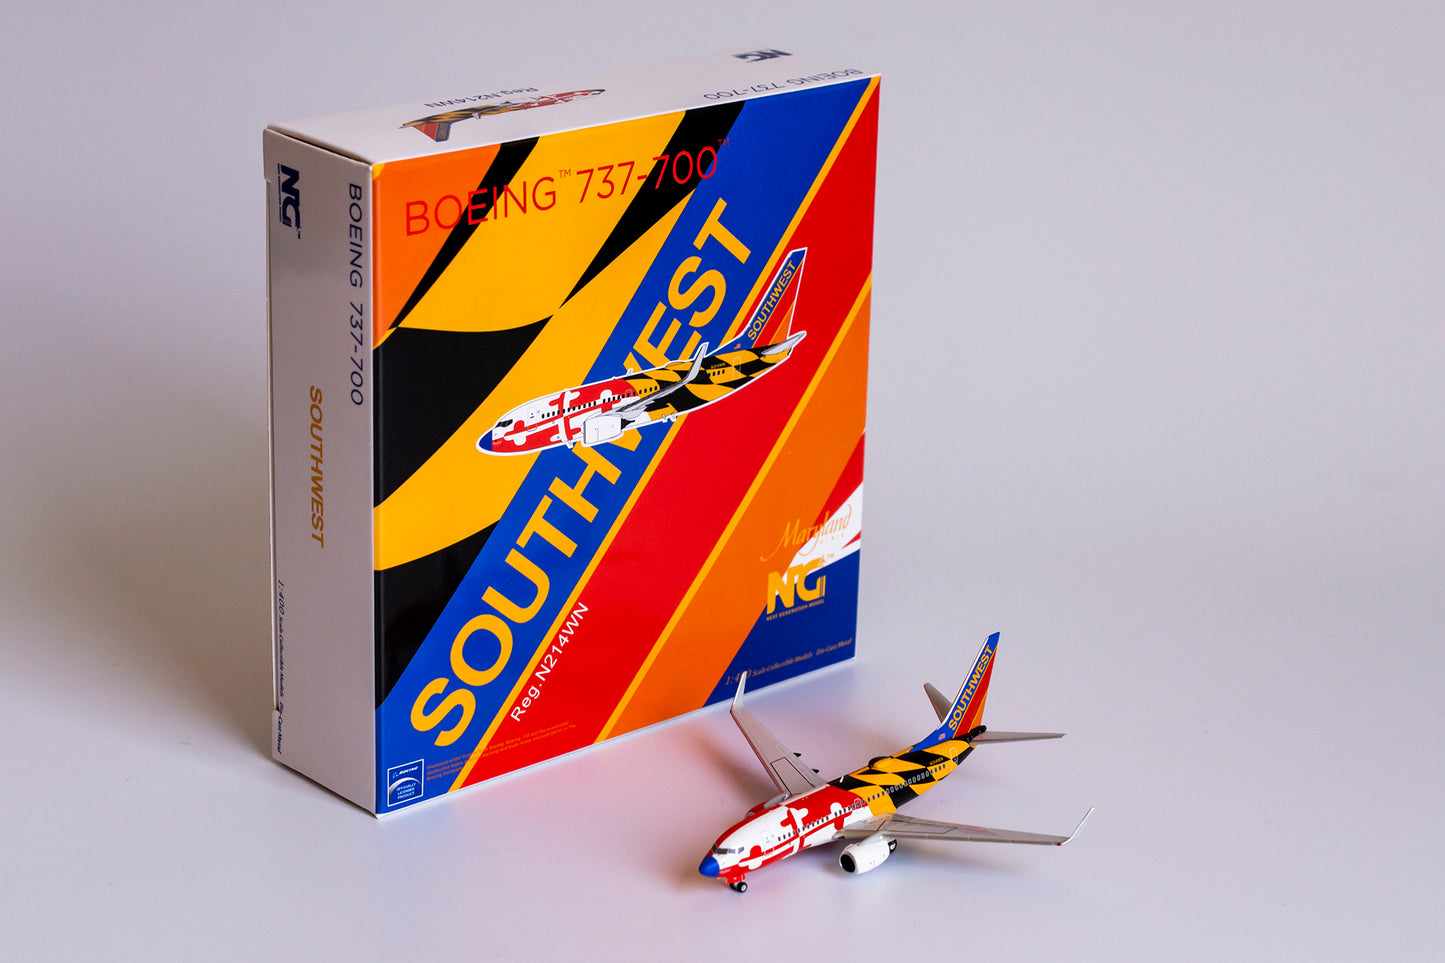 1:400 NG Models Southwest Airlines Boeing 737-700 "Maryland One" N214WN (Heart Tail) NG77007